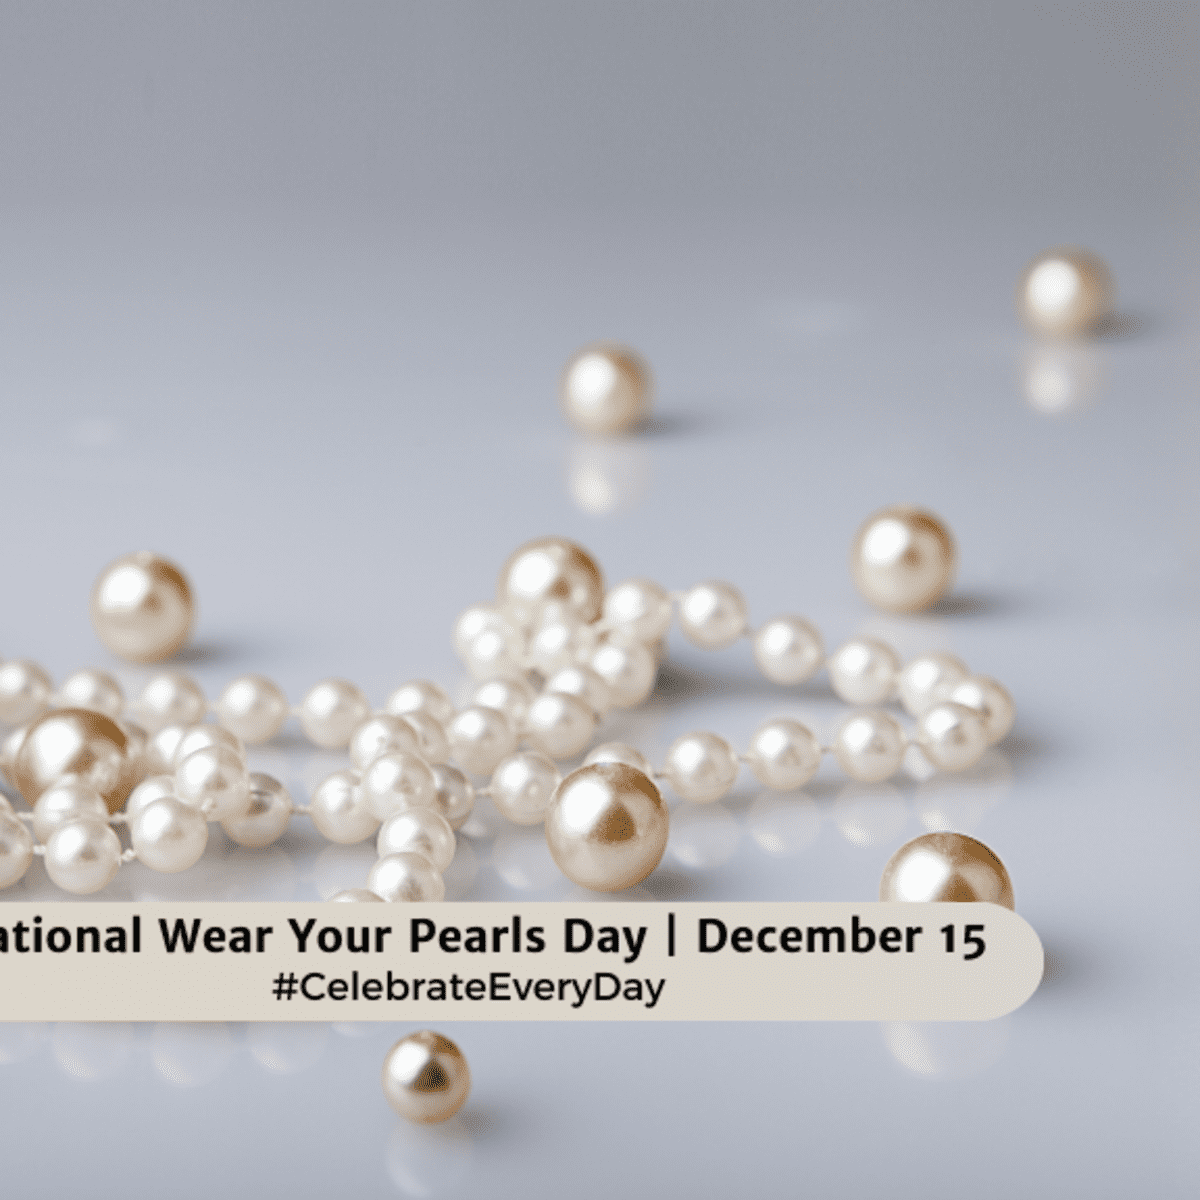 NATIONAL WEAR YOUR PEARLS DAY - December 15 - National Day Calendar